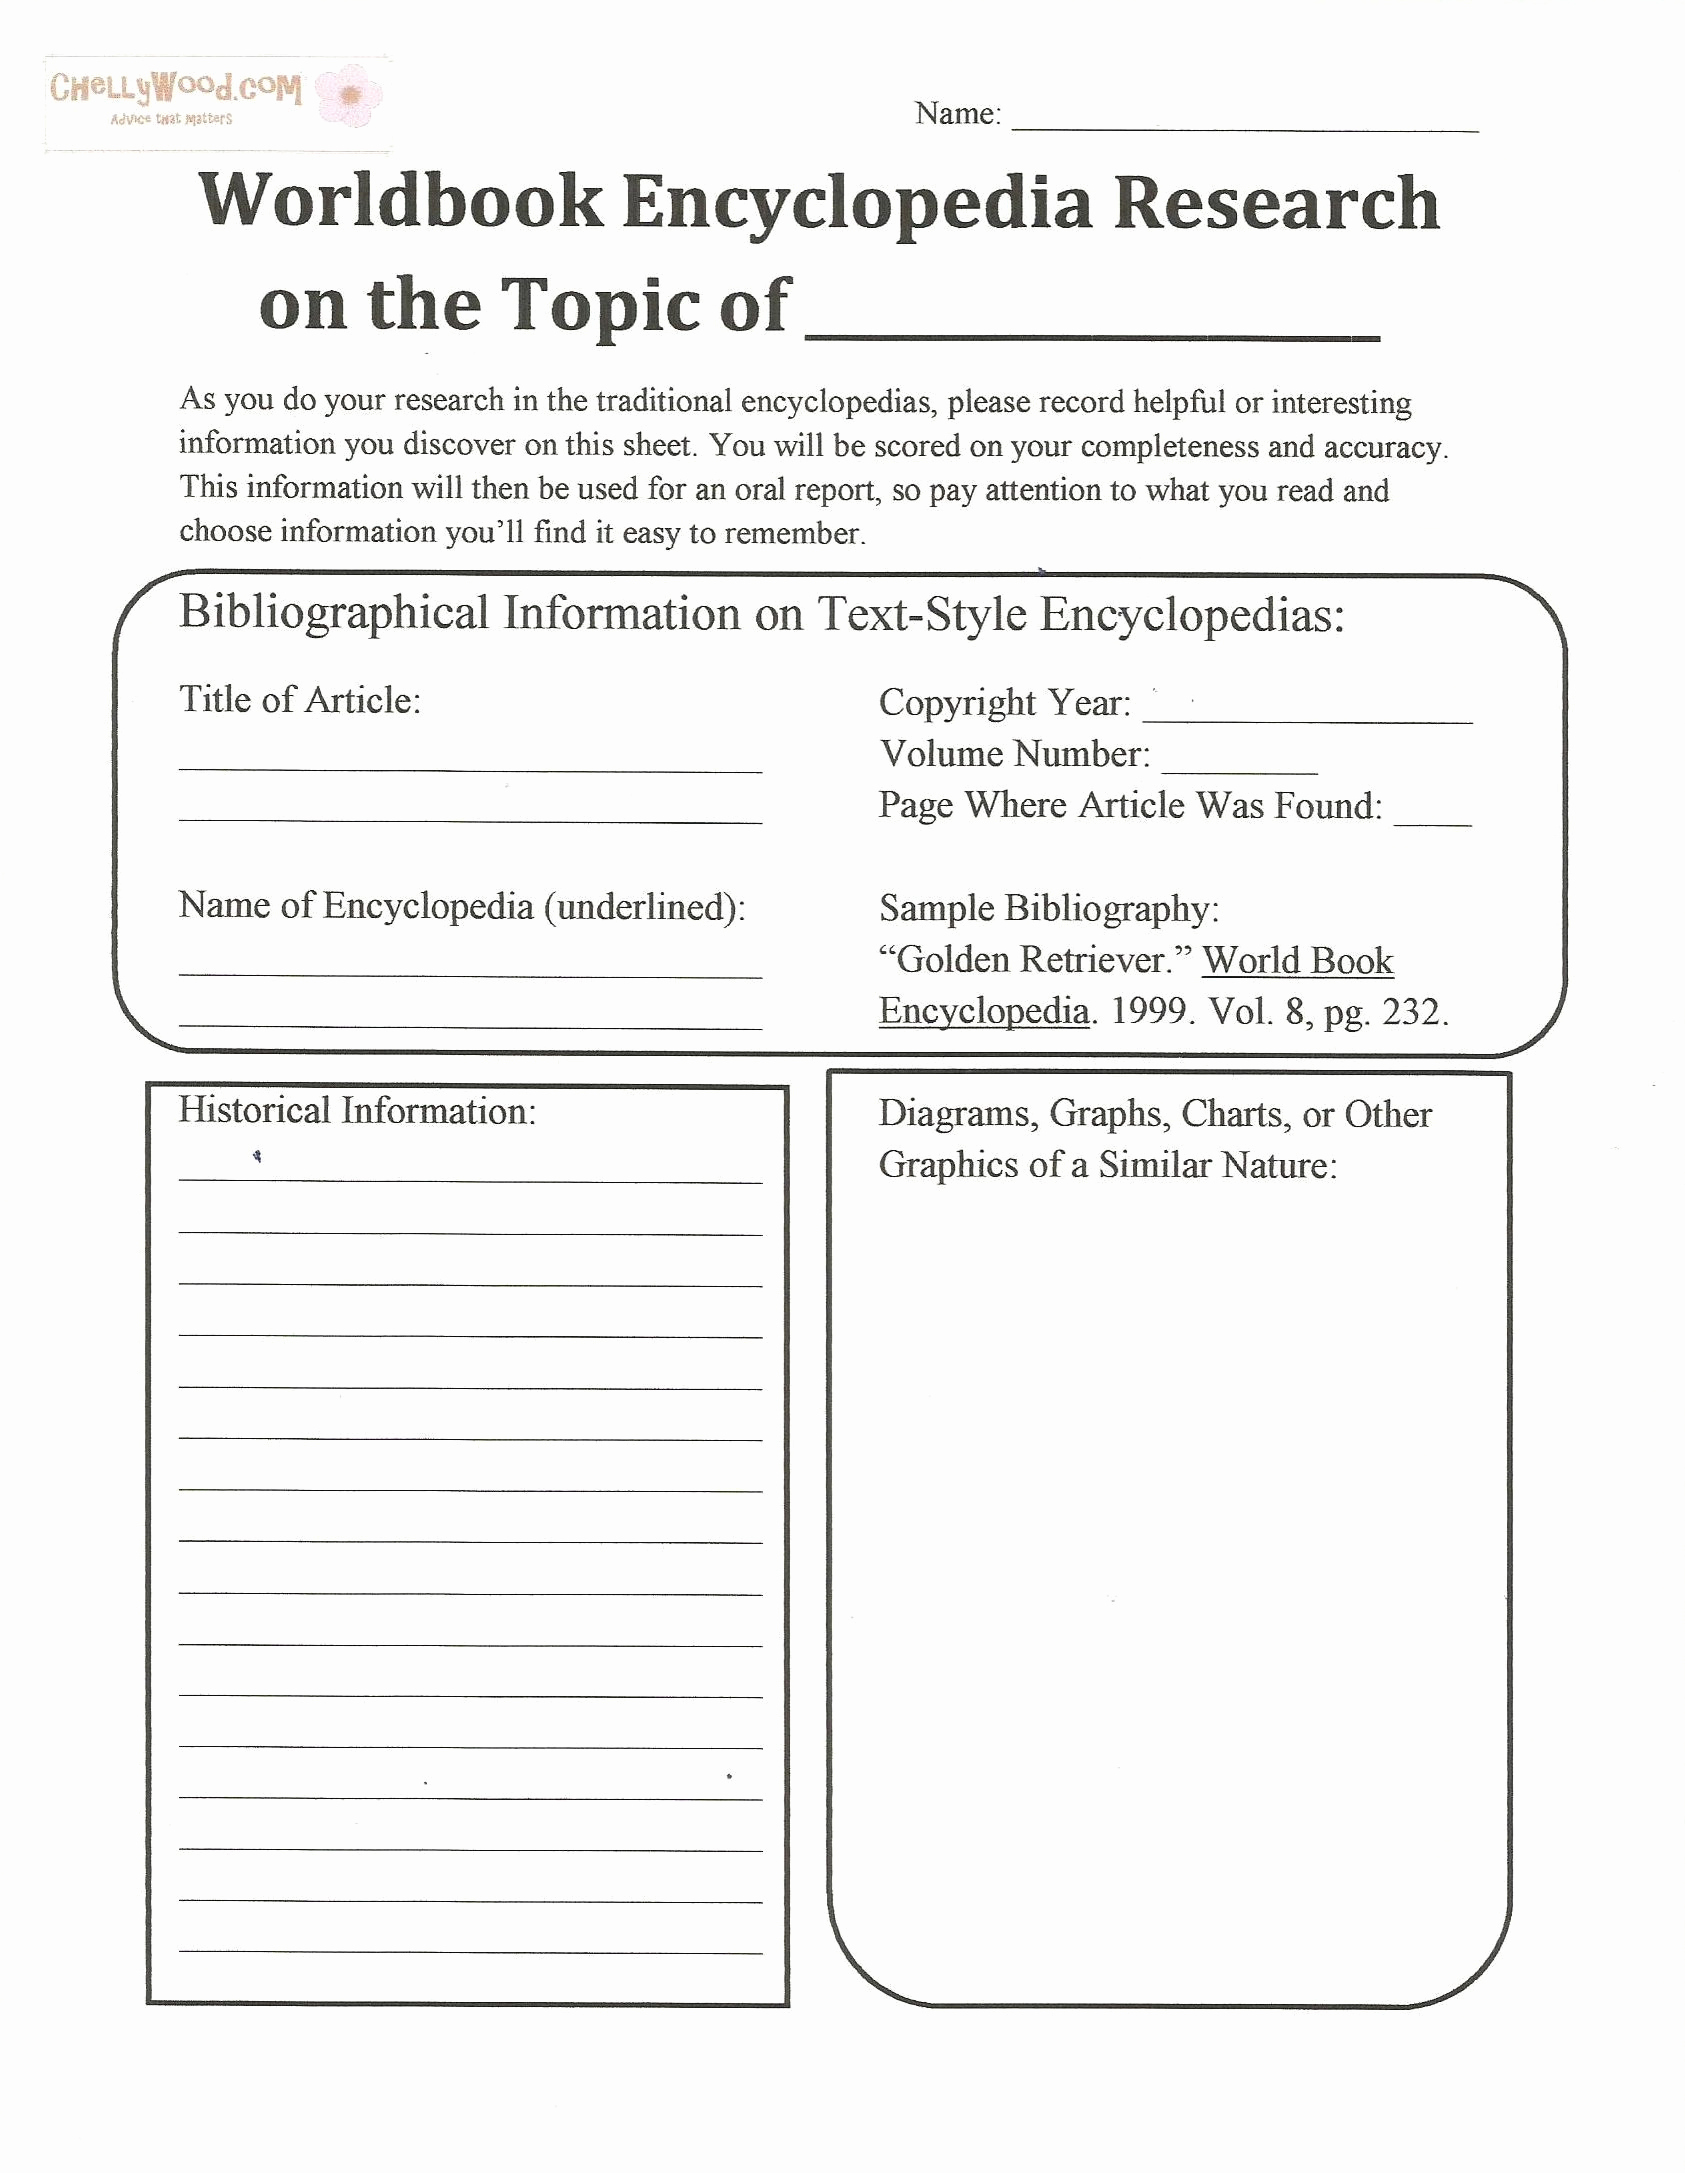 Computer Worksheets for Middle School Inspirational 20 Puter Worksheets for Middle School